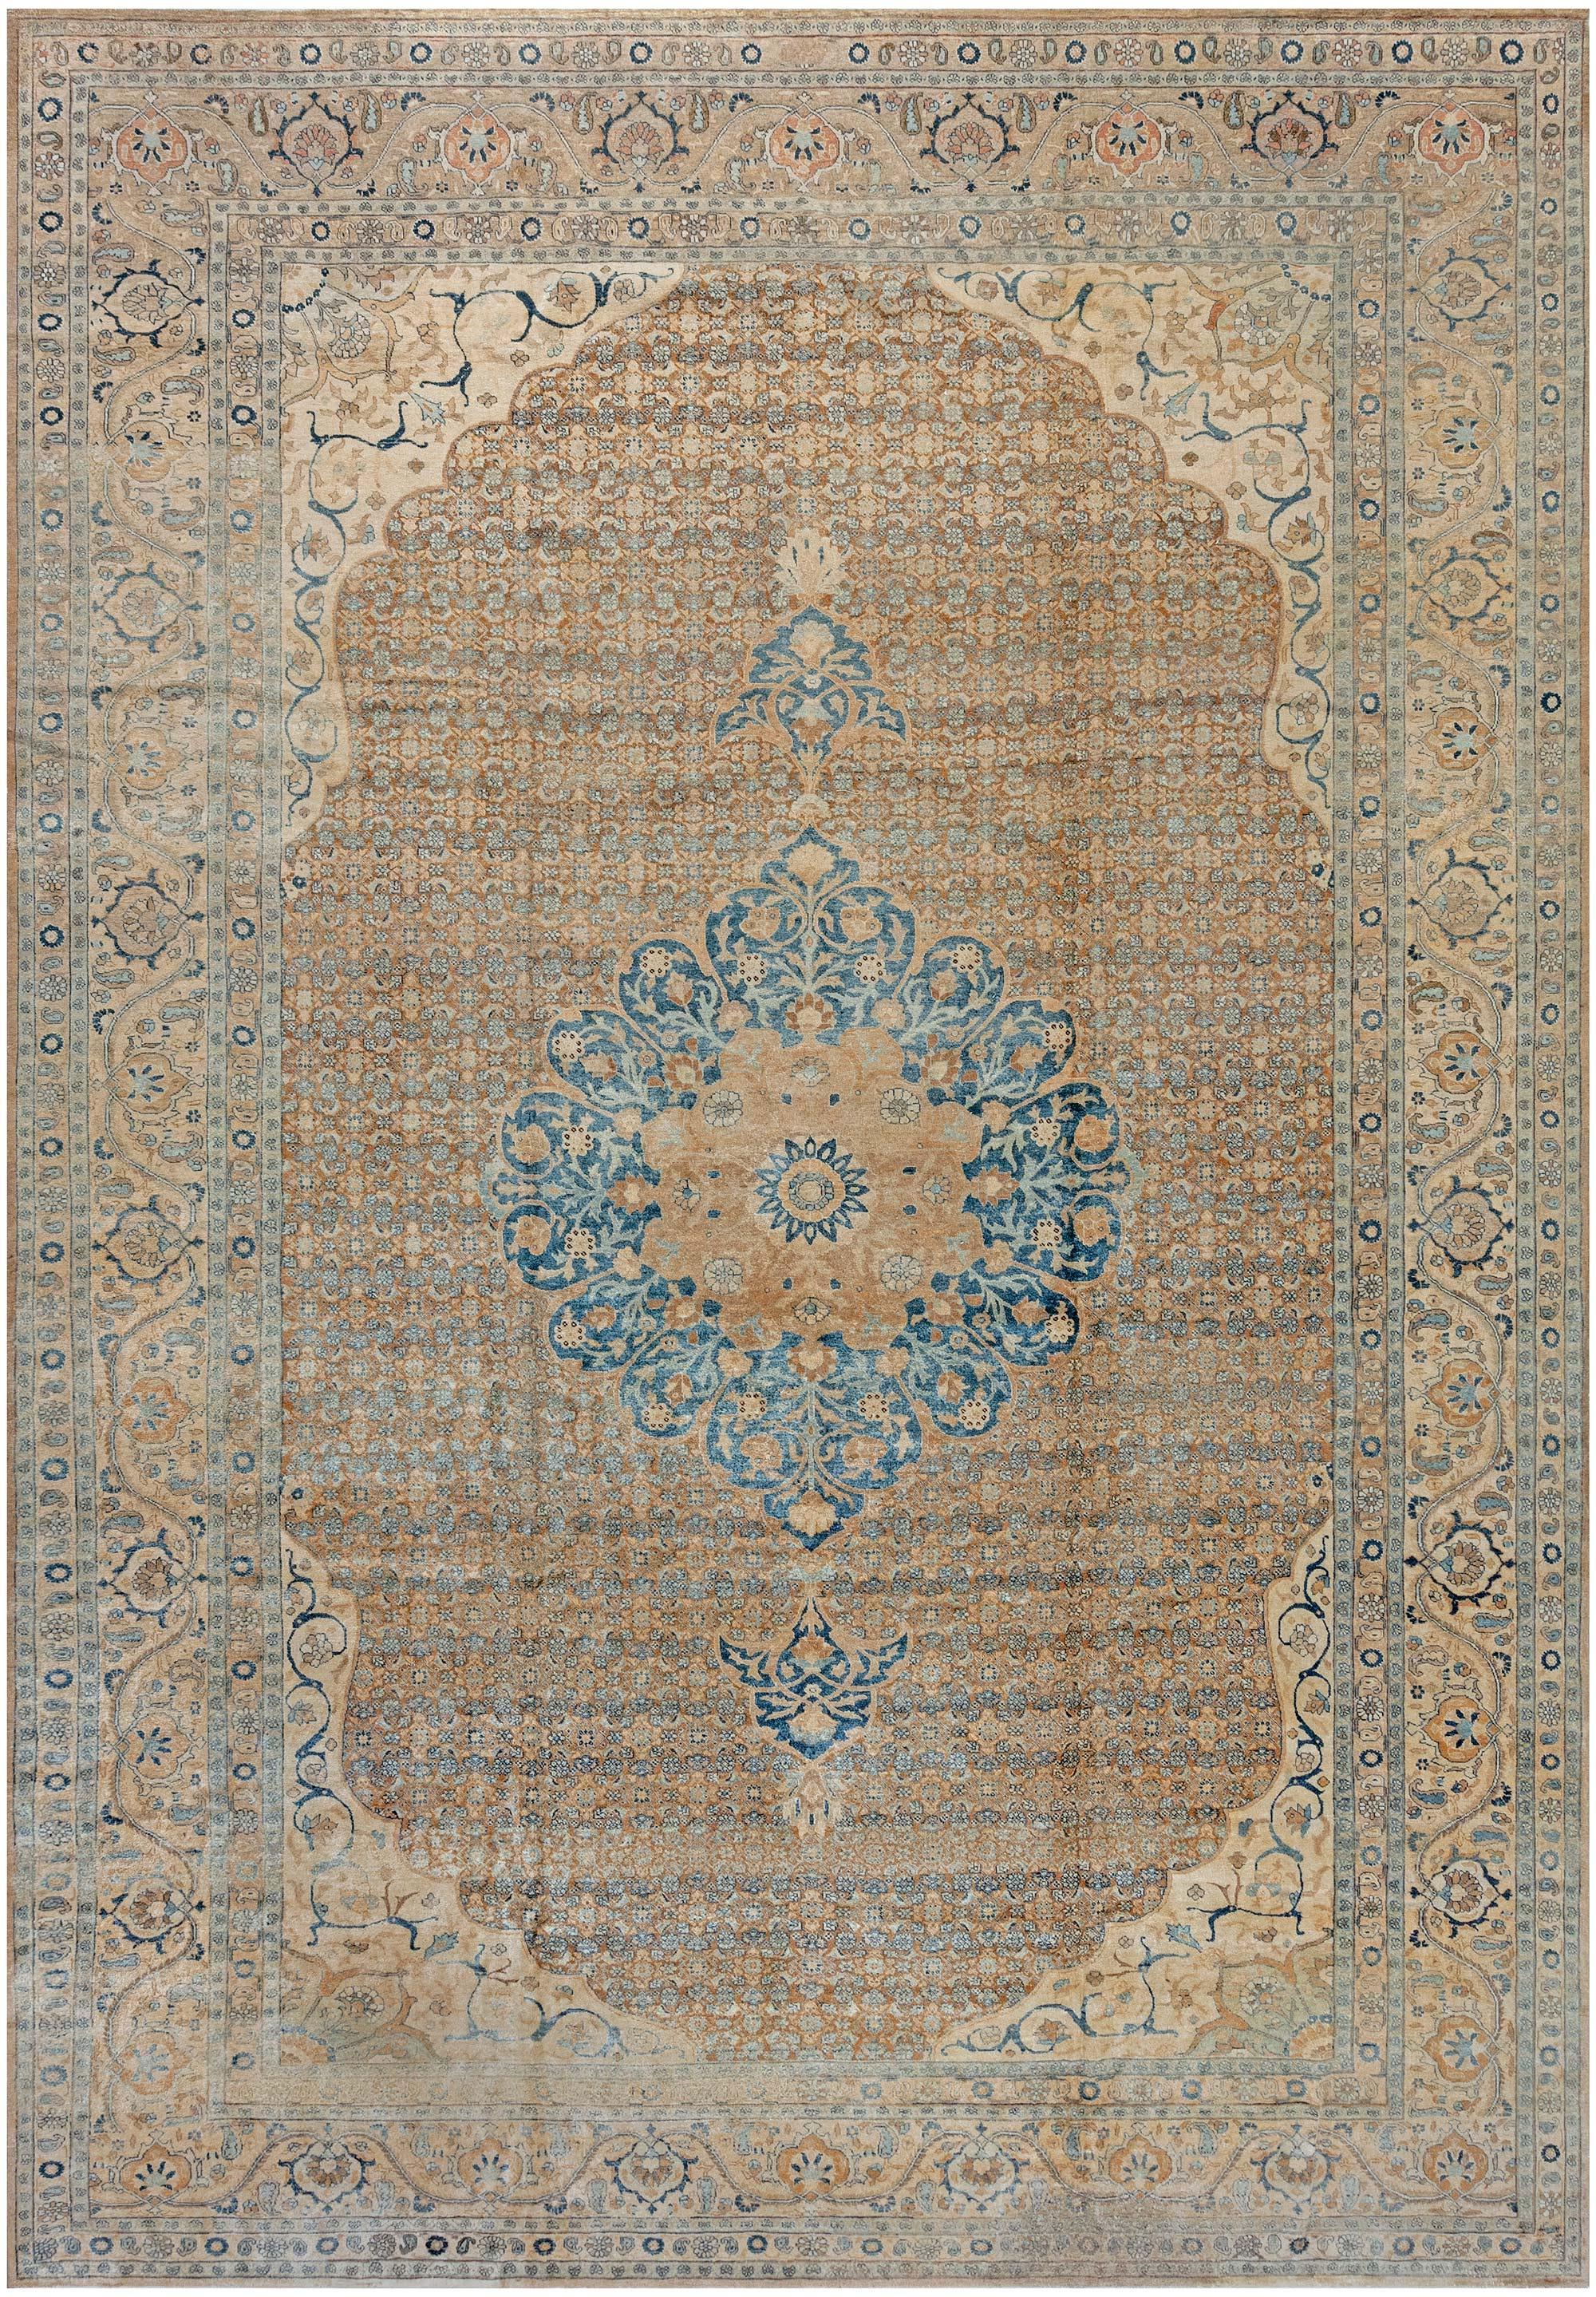 Early 20th Century Persian Tabriz Brown Blue Hand Knotted Wool Rug